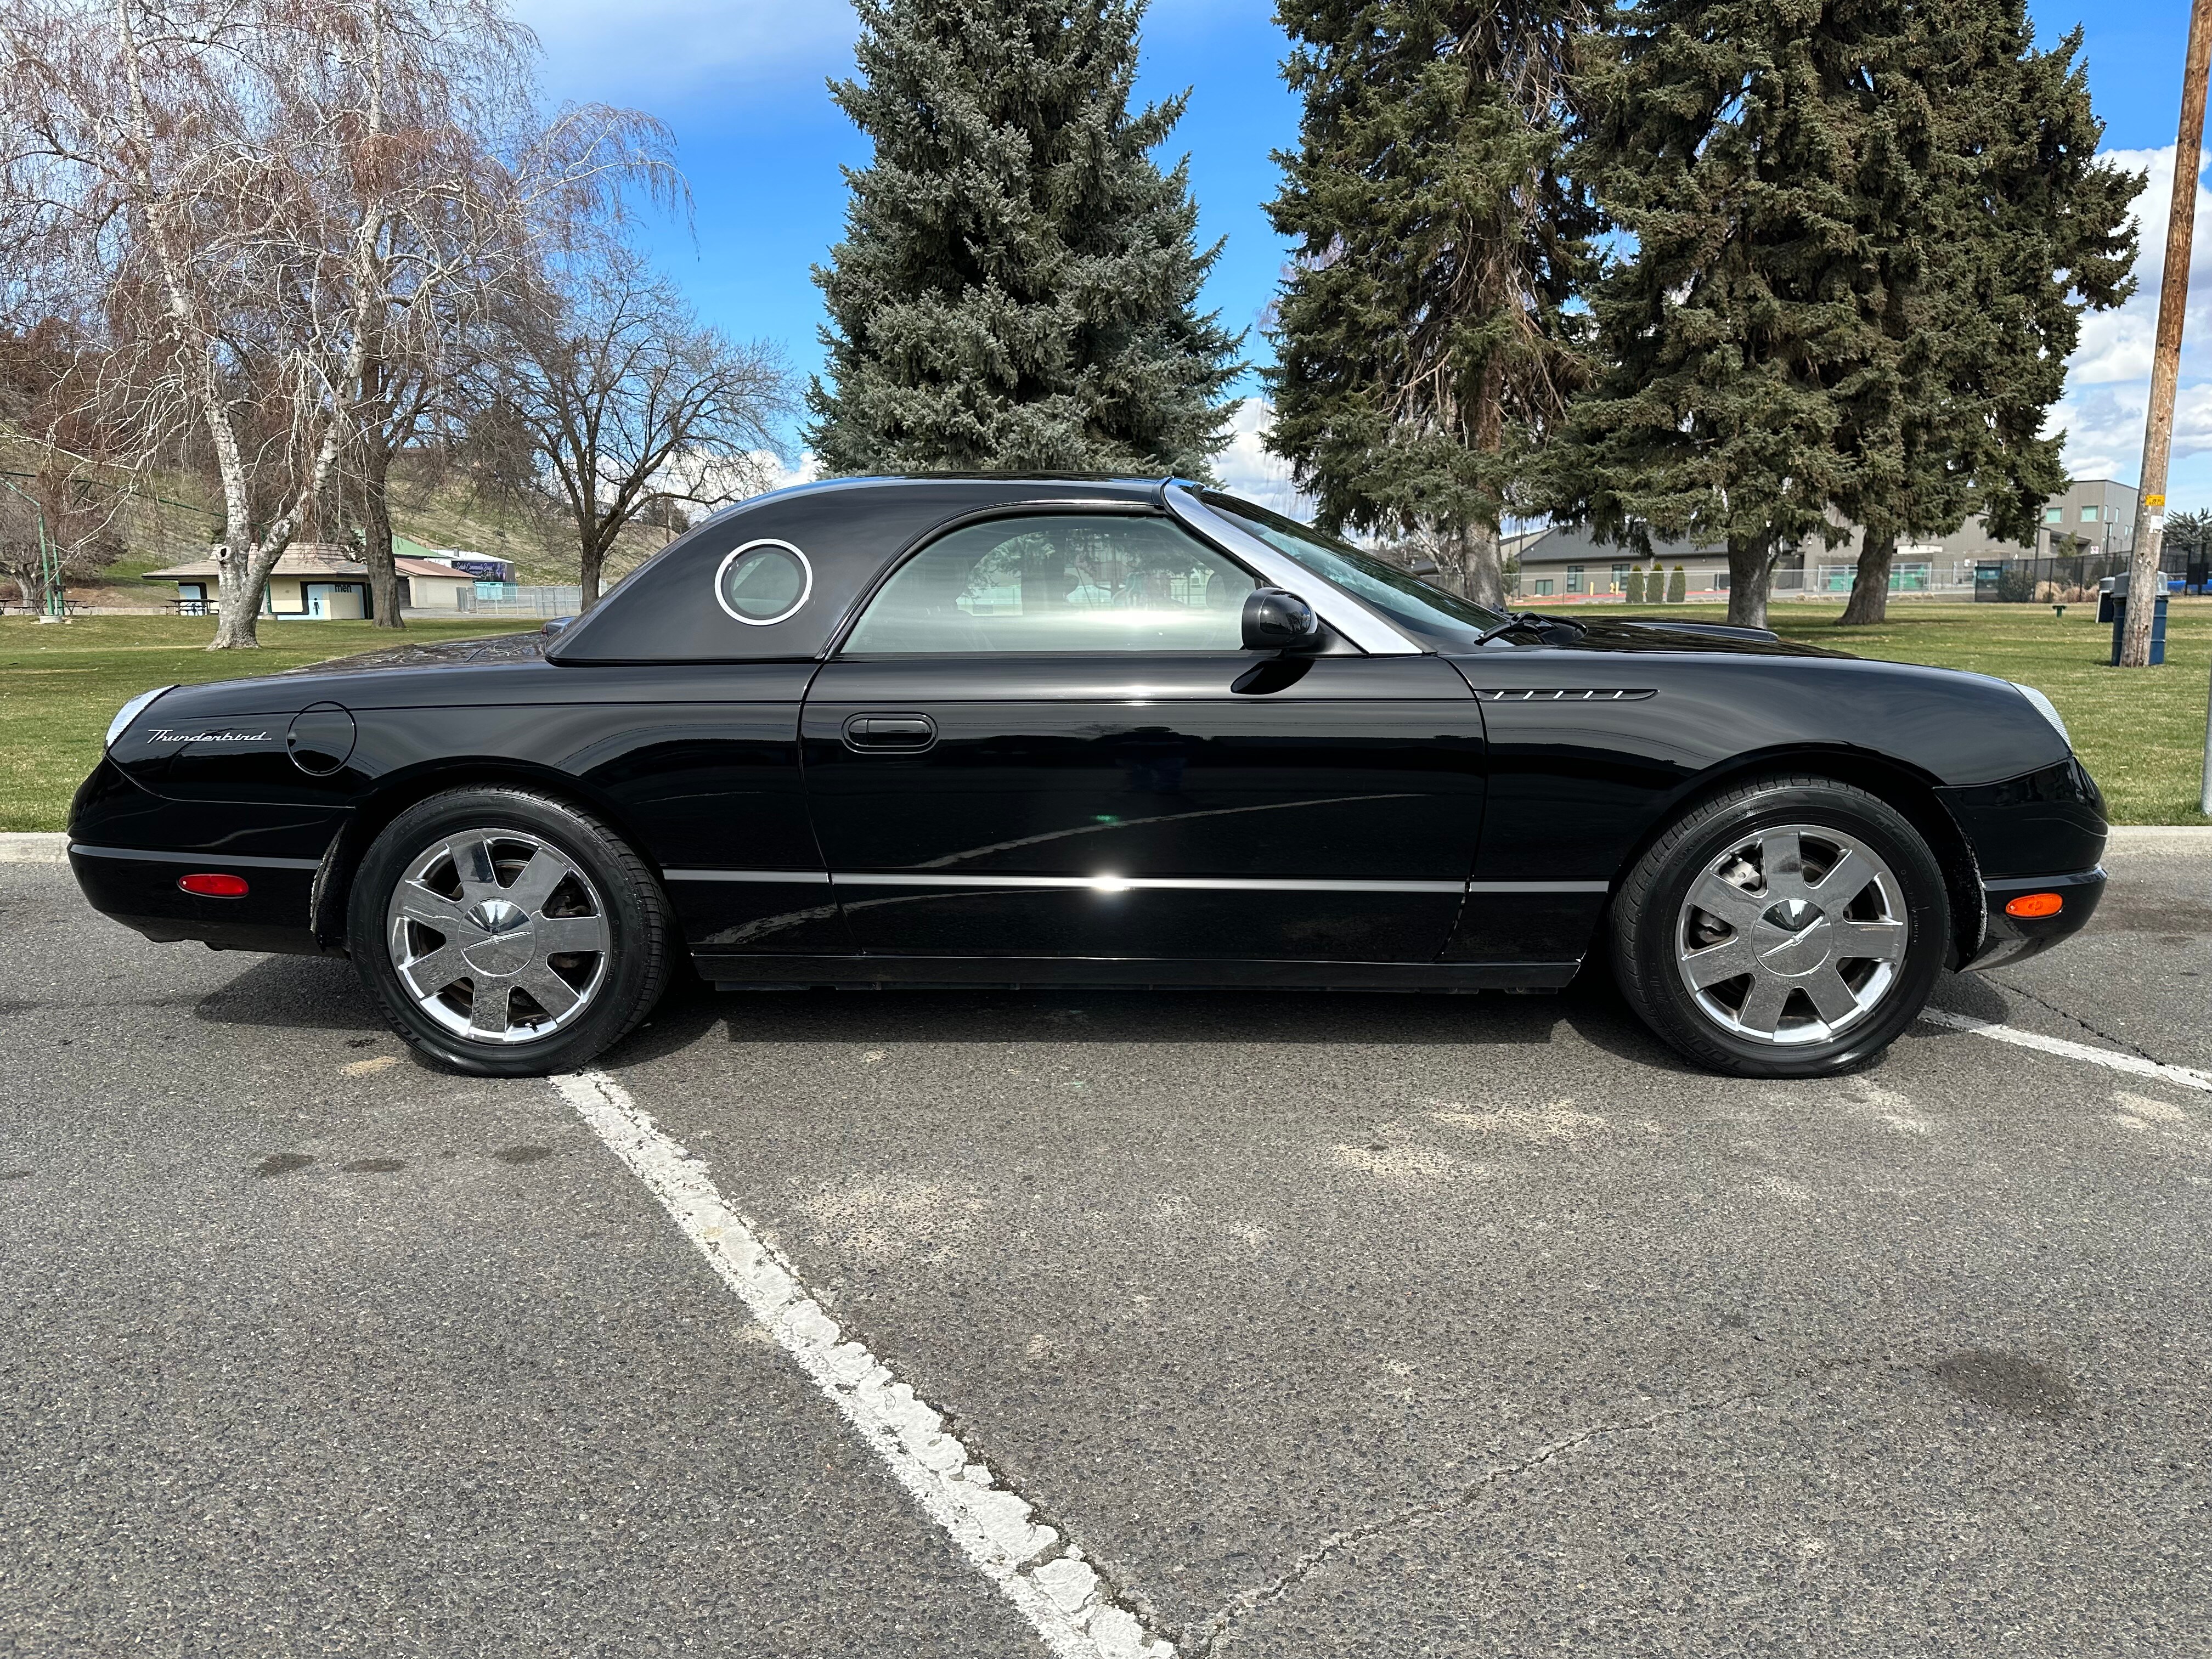 Used 2002 Ford Thunderbird Deluxe with VIN 1FAHP60A62Y111897 for sale in Selah, WA